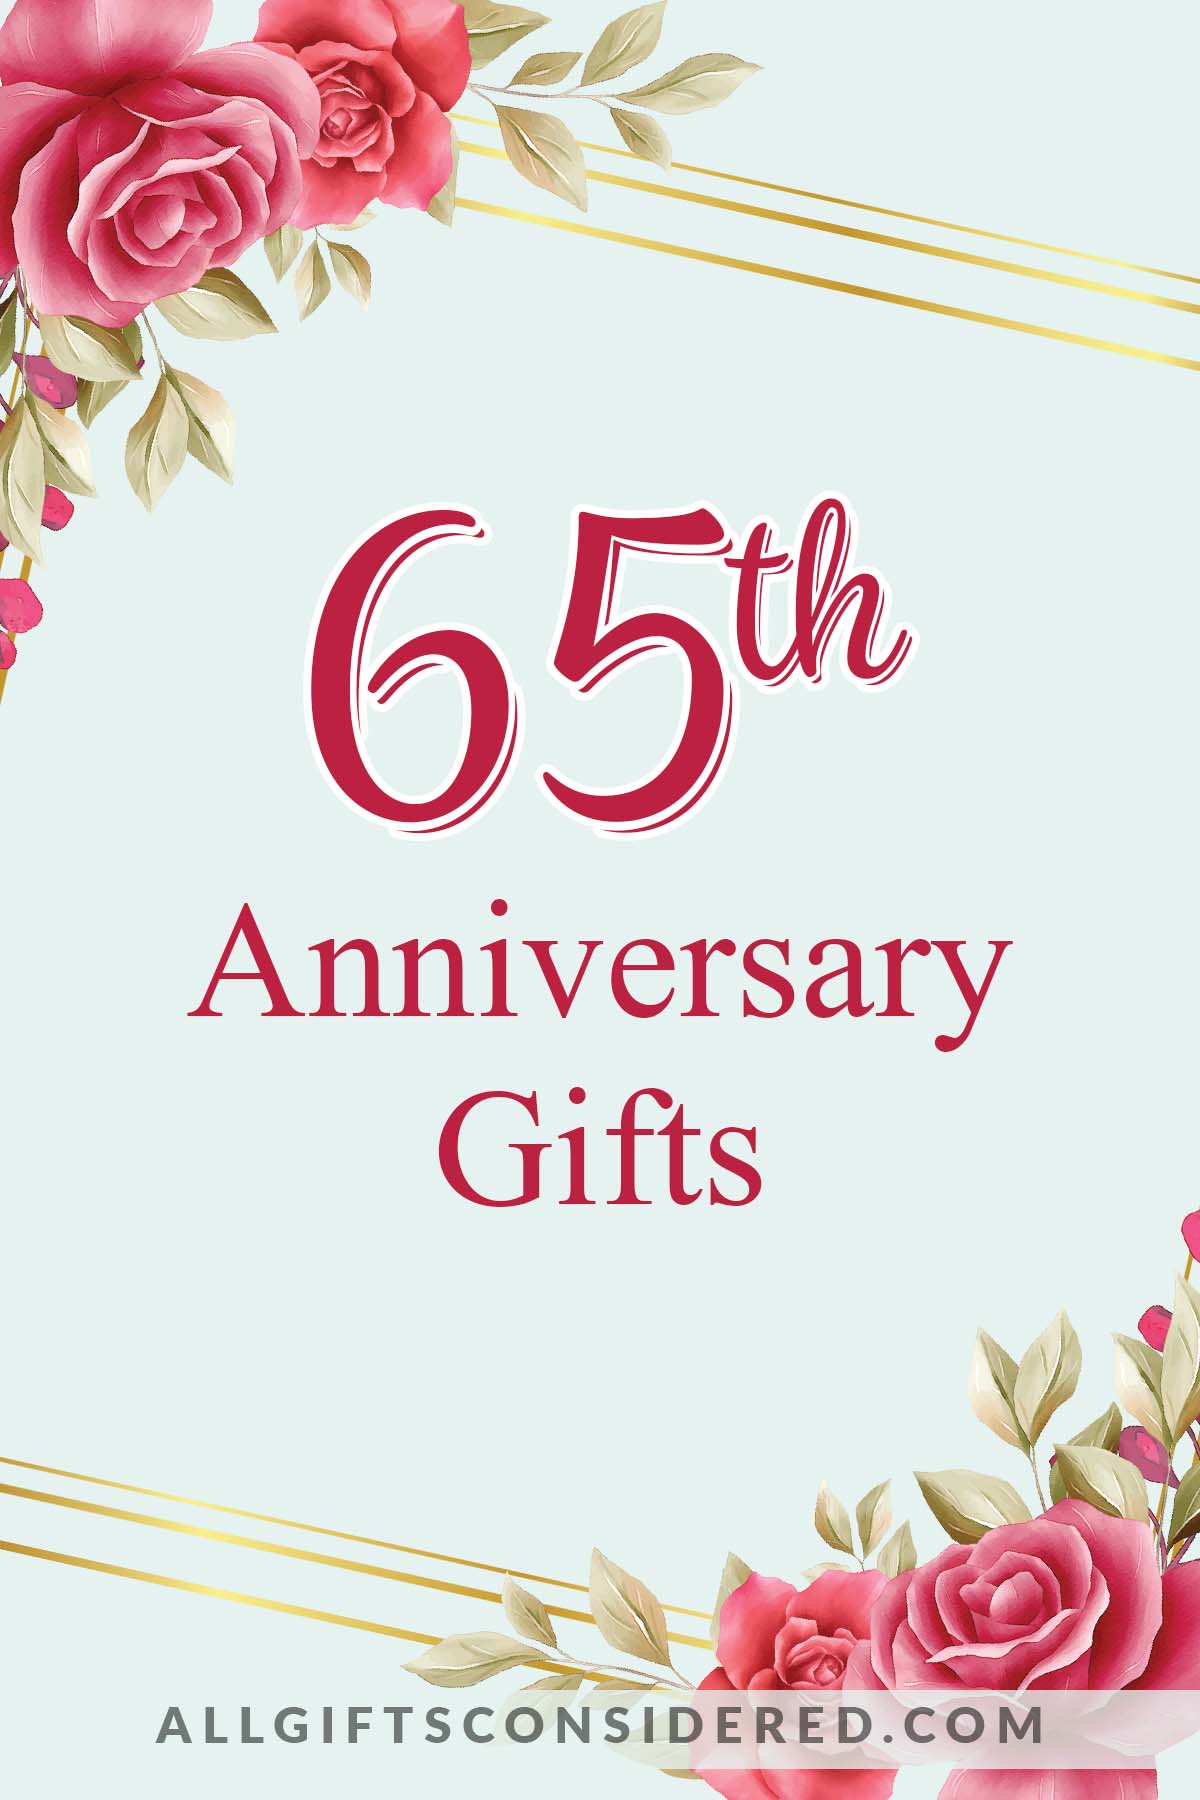 65th anniversary gifts - feature image